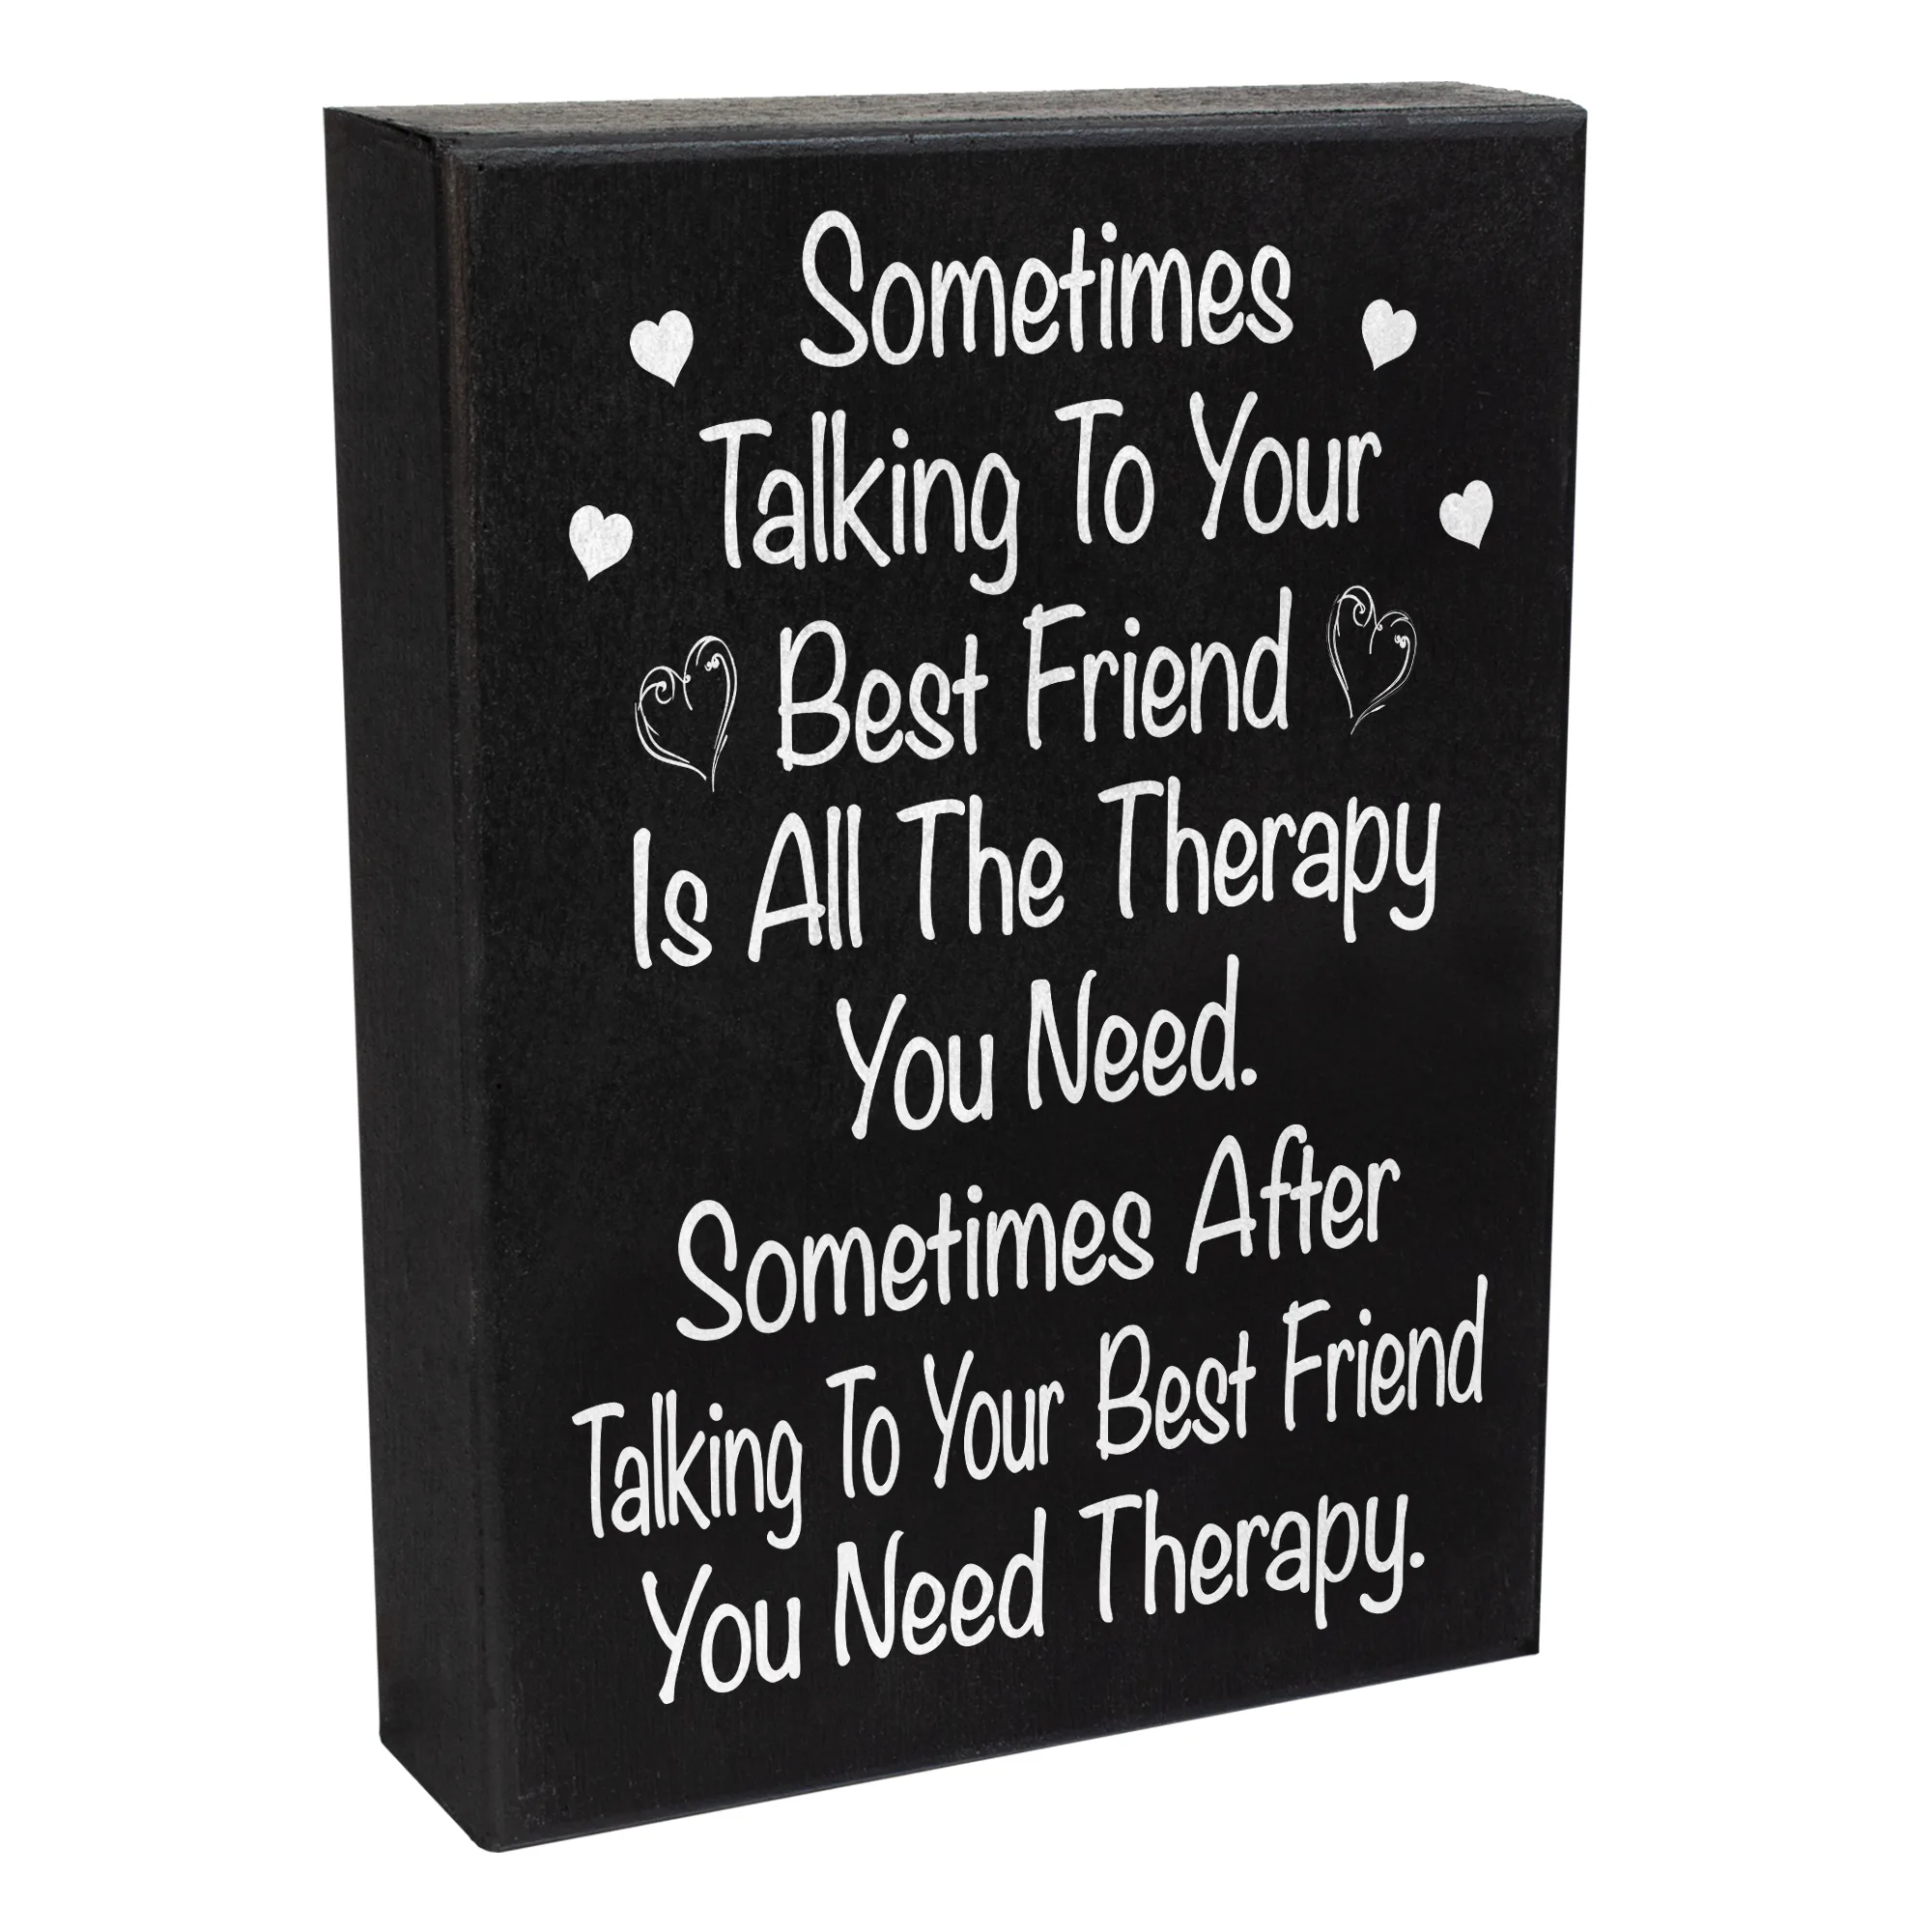 Funny Gifts, Fun Gifts for Friends